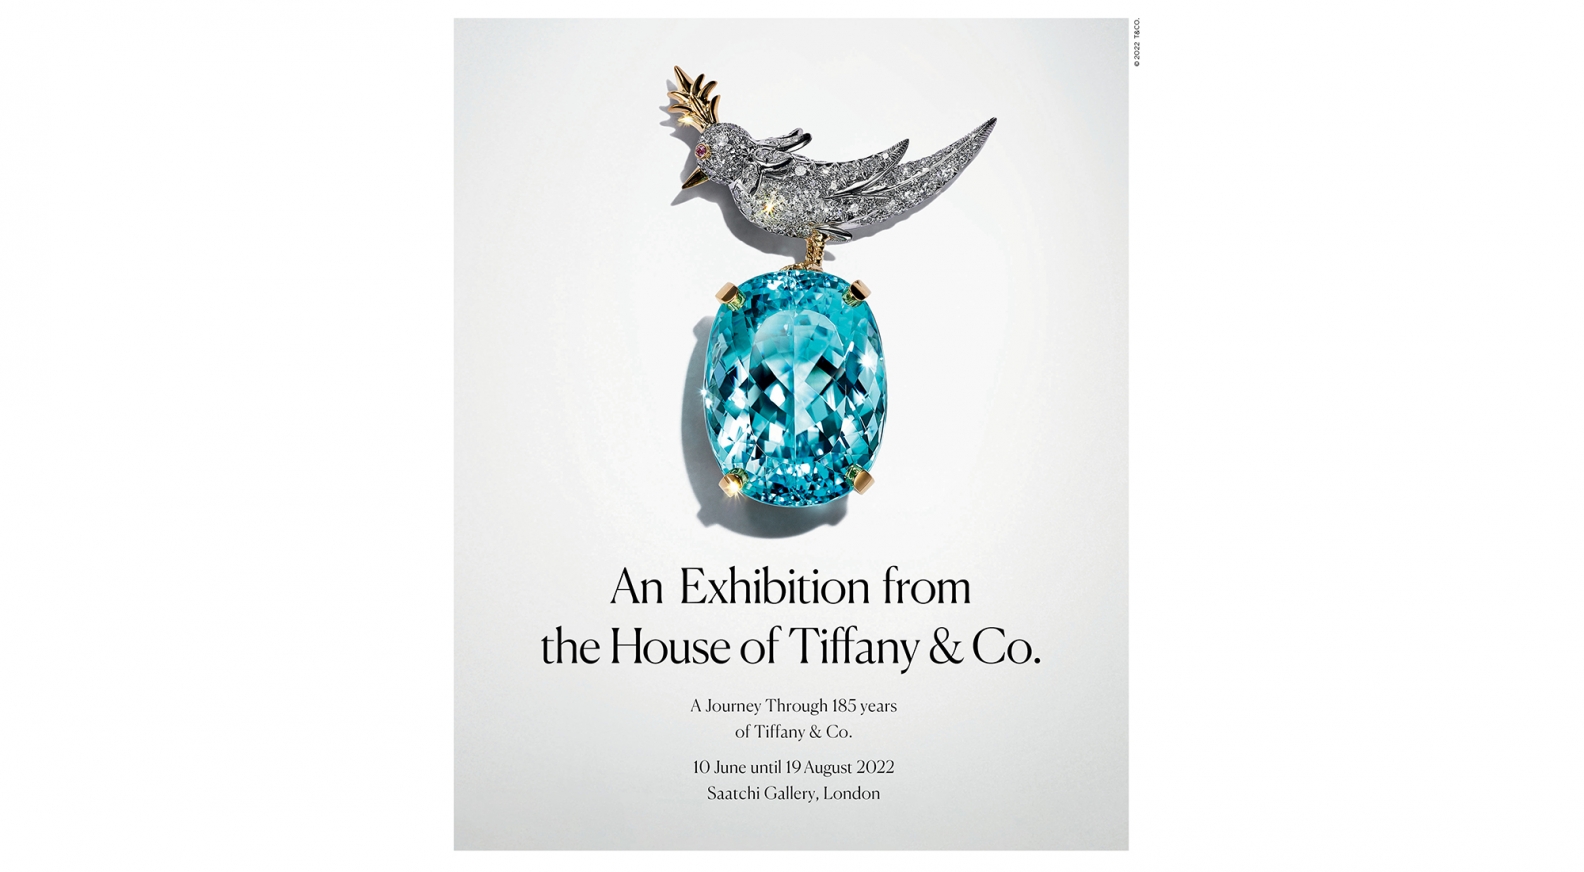 Tiffany & Co.'s Brand Exhibition Vision & Virtuosity Opens in London